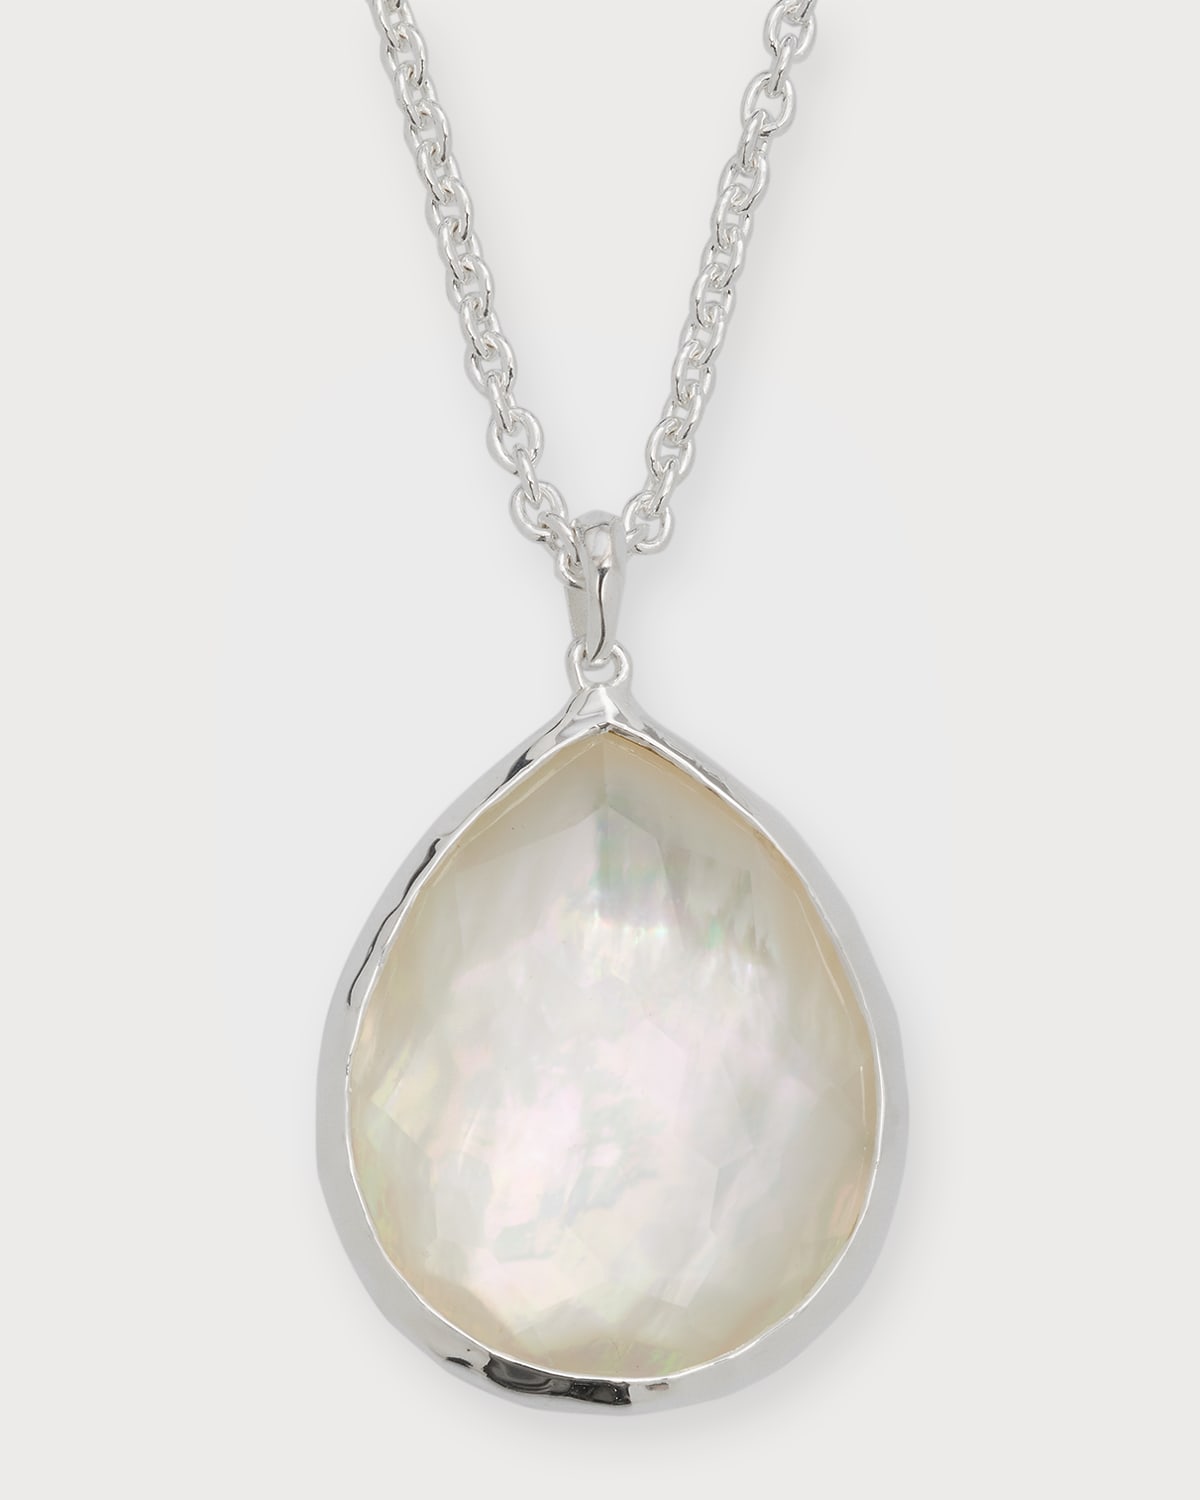 Ippolita Sterling Silver Teardrop Pendant Necklace, Mother-of-pearl